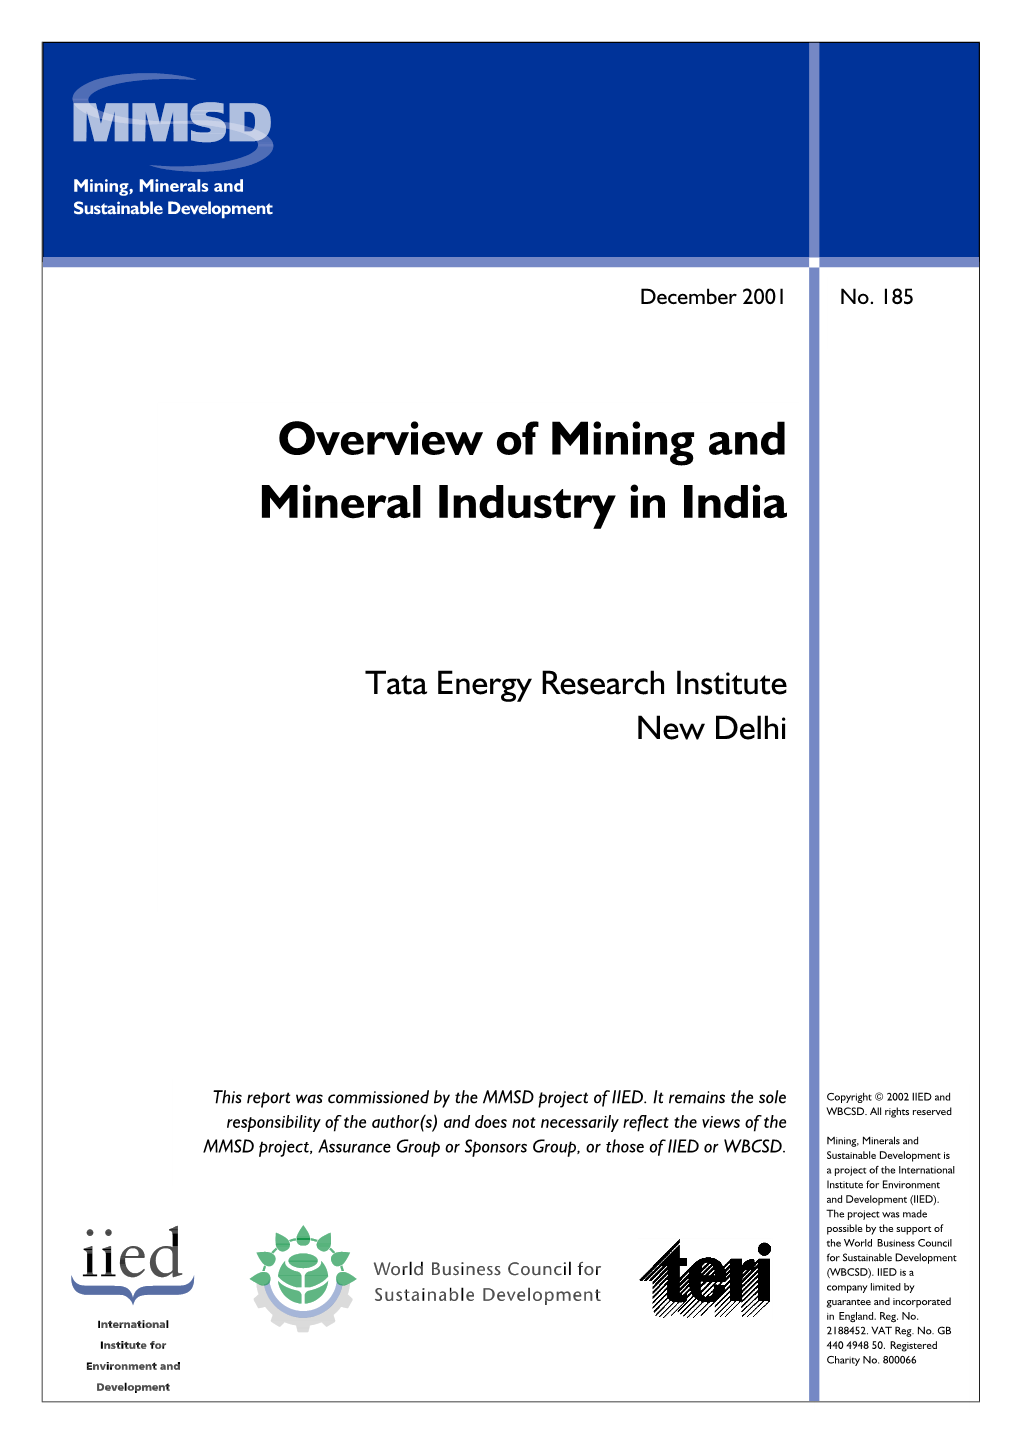 Overview of Mining and Mineral Industry in India